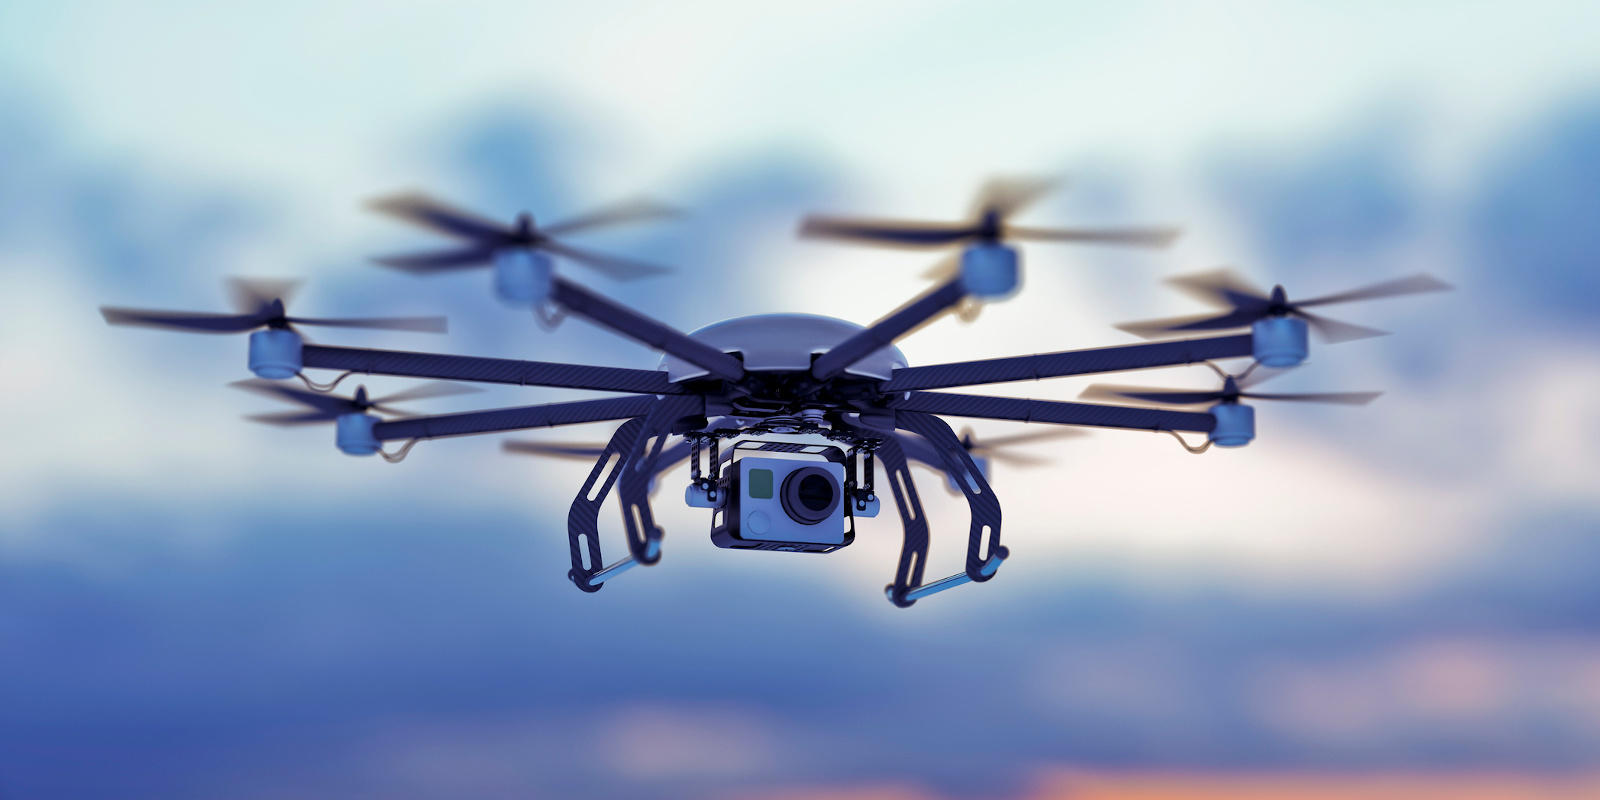 Call on us for aerial videos when you need a bird’s eye view.